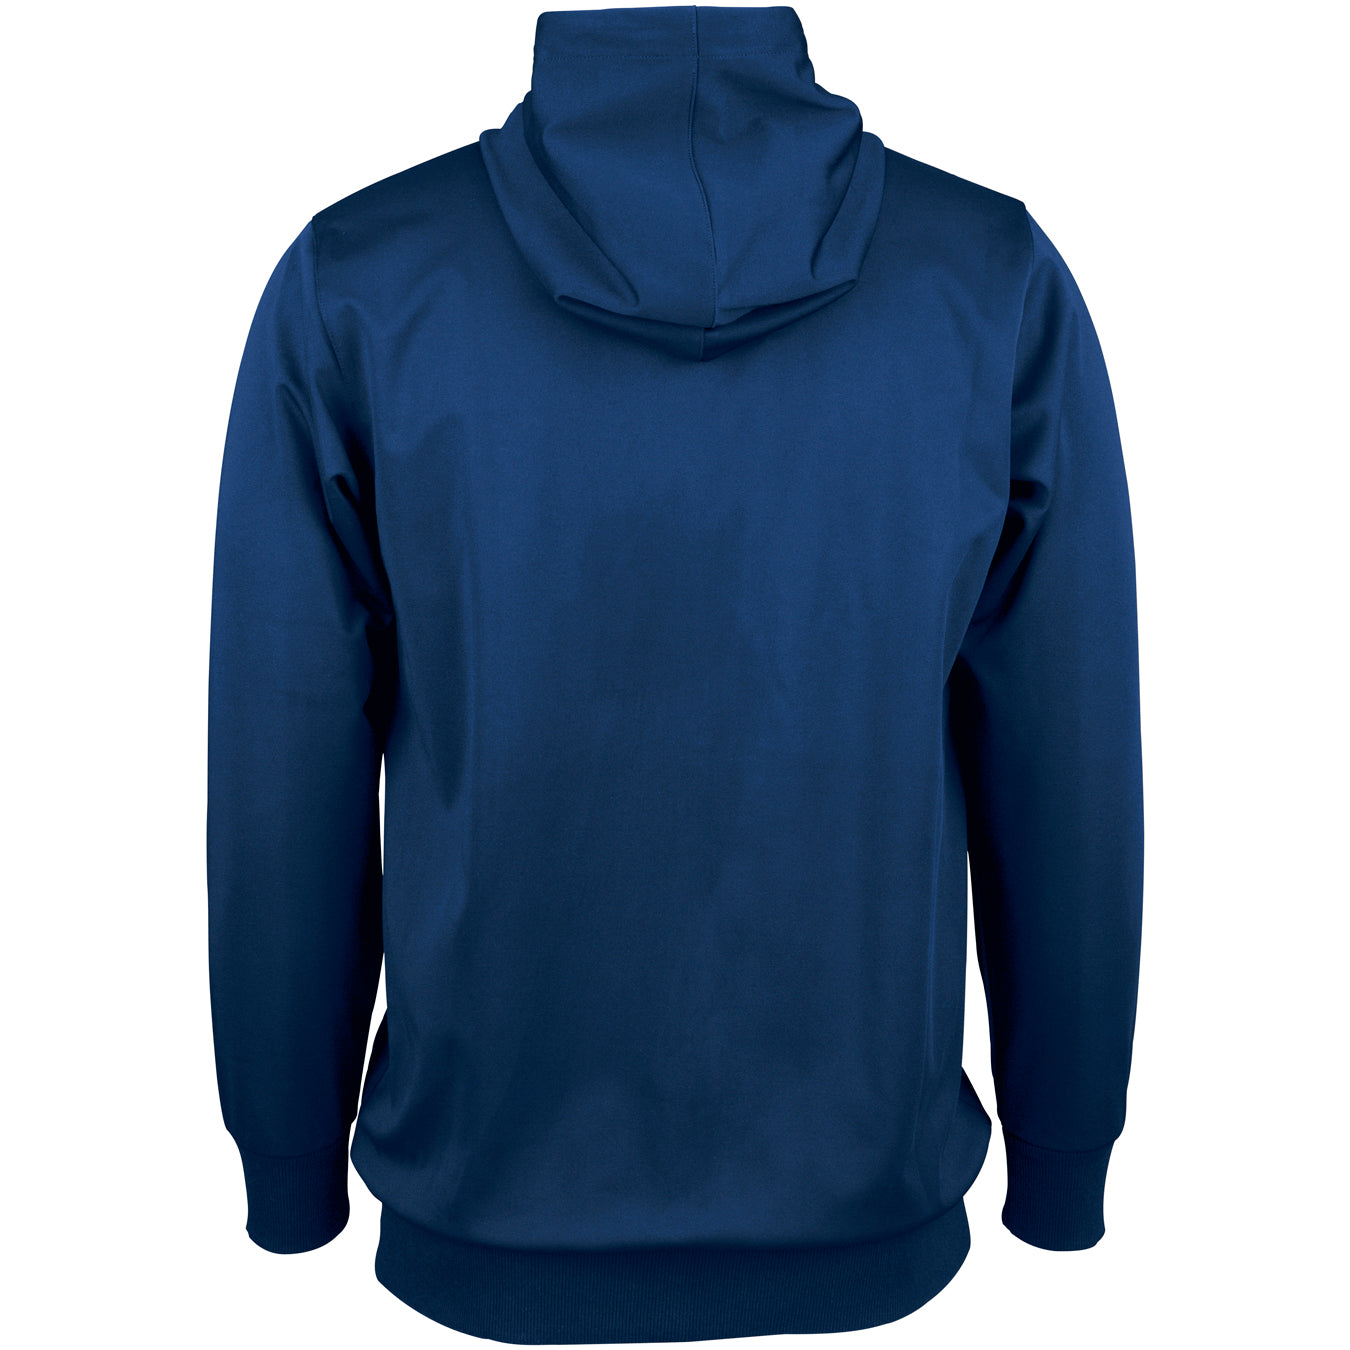 Pro Performance Hoodie | Gray-Nicolls - Free Shipping, Loyalty Points